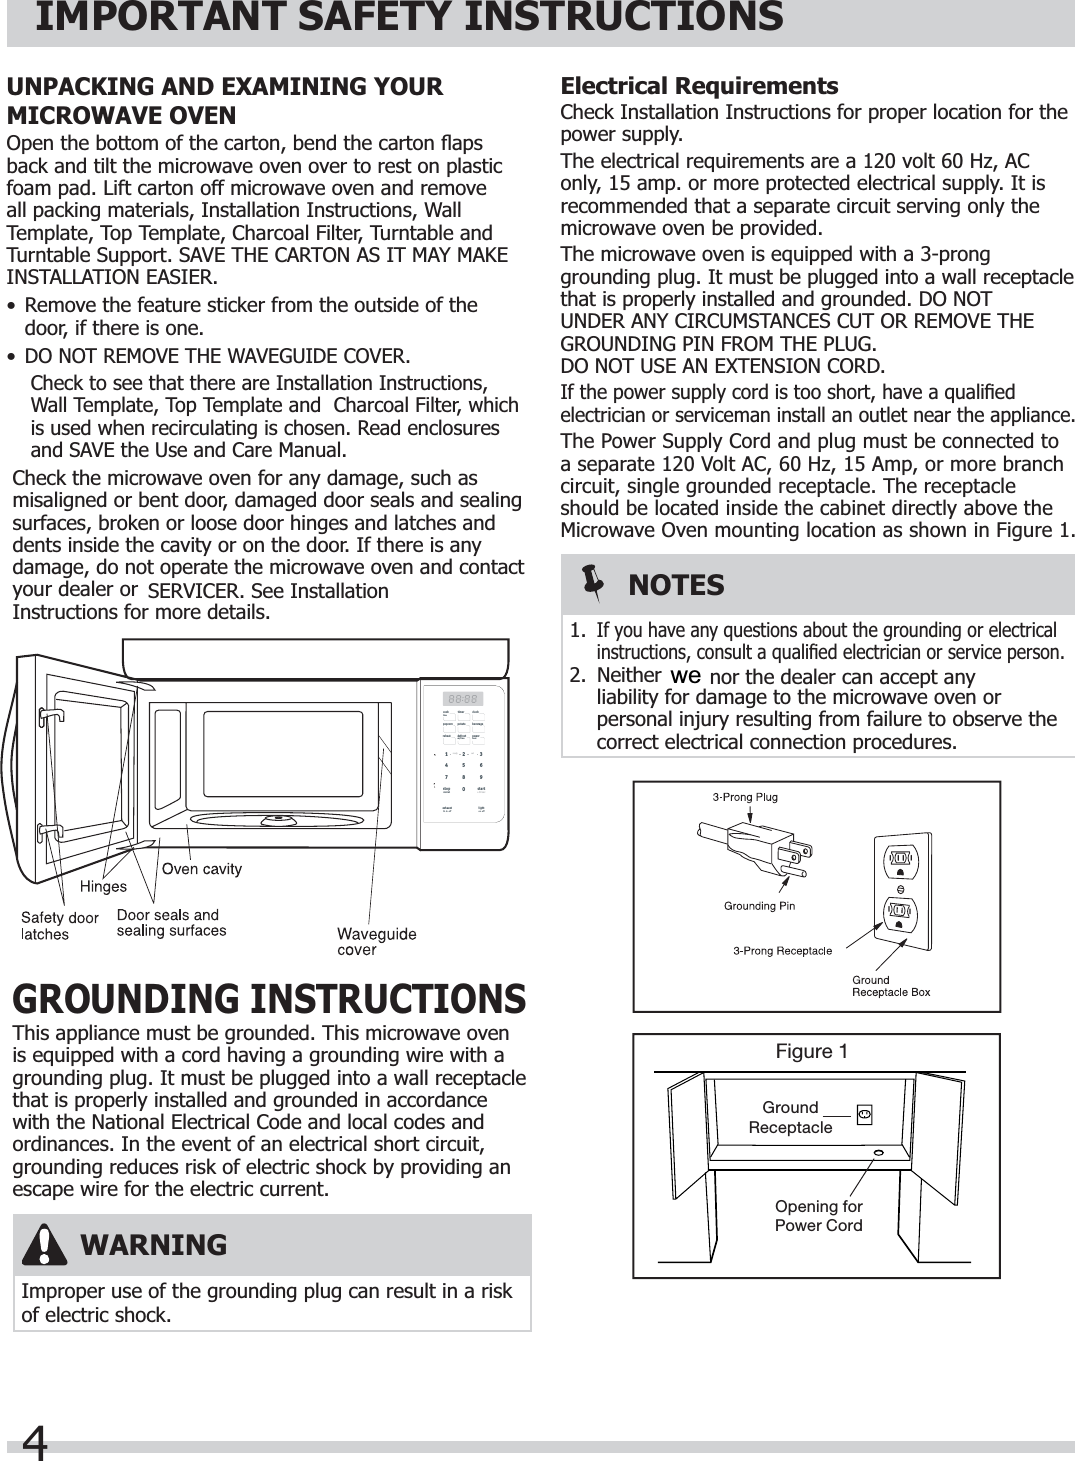 4IMPORTANT SAFETY INSTRUCTIONSElectrical RequirementsCheck Installation Instructions for proper location for the power supply.The electrical requirements are a 120 volt 60 Hz, AC only, 15 amp. or more protected electrical supply. It is recommended that a separate circuit serving only the microwave oven be provided.The microwave oven is equipped with a 3-prong grounding plug. It must be plugged into a wall receptacle that is properly installed and grounded. DO NOT UNDER ANY CIRCUMSTANCES CUT OR REMOVE THE GROUNDING PIN FROM THE PLUG. DO NOT USE AN EXTENSION CORD.If the power supply cord is too short, have a qualiﬁ ed electrician or serviceman install an outlet near the appliance.The Power Supply Cord and plug must be connected to a separate 120 Volt AC, 60 Hz, 15 Amp, or more branch circuit, single grounded receptacle. The receptacle should be located inside the cabinet directly above the Microwave Oven mounting location as shown in Figure 1.Figure 1GroundReceptacleOpening forPower CordWARNINGImproper use of the grounding plug can result in a risk of electric shock.NOTES1.If you have any questions about the grounding or electrical instructions, consult a qualiﬁ ed electrician or service person.2. Neither  nor the dealer can accept any liability for damage to the microwave oven or personal injury resulting from failure to observe the correct electrical connection procedures.GROUNDING INSTRUCTIONSThis appliance must be grounded. This microwave oven is equipped with a cord having a grounding wire with a grounding plug. It must be plugged into a wall receptacle that is properly installed and grounded in accordance with the National Electrical Code and local codes and ordinances. In the event of an electrical short circuit, grounding reduces risk of electric shock by providing an escape wire for the electric current.UNPACKING AND EXAMINING YOUR MICROWAVE OVENOpen the bottom of the carton, bend the carton ﬂ aps back and tilt the microwave oven over to rest on plastic foam pad. Lift carton off microwave oven and remove all packing materials, Installation Instructions, Wall Template, Top Template, Charcoal Filter, Turntable and Turntable Support. SAVE THE CARTON AS IT MAY MAKE INSTALLATION EASIER.•  Remove the feature sticker from the outside of the door, if there is one.•DO NOT REMOVE THE WAVEGUIDE COVER.Check to see that there are Installation Instructions, Wall Template, Top Template and  Charcoal Filter, which is used when recirculating is chosen. Read enclosures and SAVE the Use and Care Manual.Check the microwave oven for any damage, such as misaligned or bent door, damaged door seals and sealing surfaces, broken or loose door hinges and latches and dents inside the cavity or on the door. If there is any damage, do not operate the microwave oven and contact your dealer or  SERVICER. See Installation Instructions for more details.startstopcancelexhausthi·lo·offlighton·offclockpopcorn potato beveragereheat defrostwt/timepowerlevel+ 30 sectimercooktimeready set0132987654we